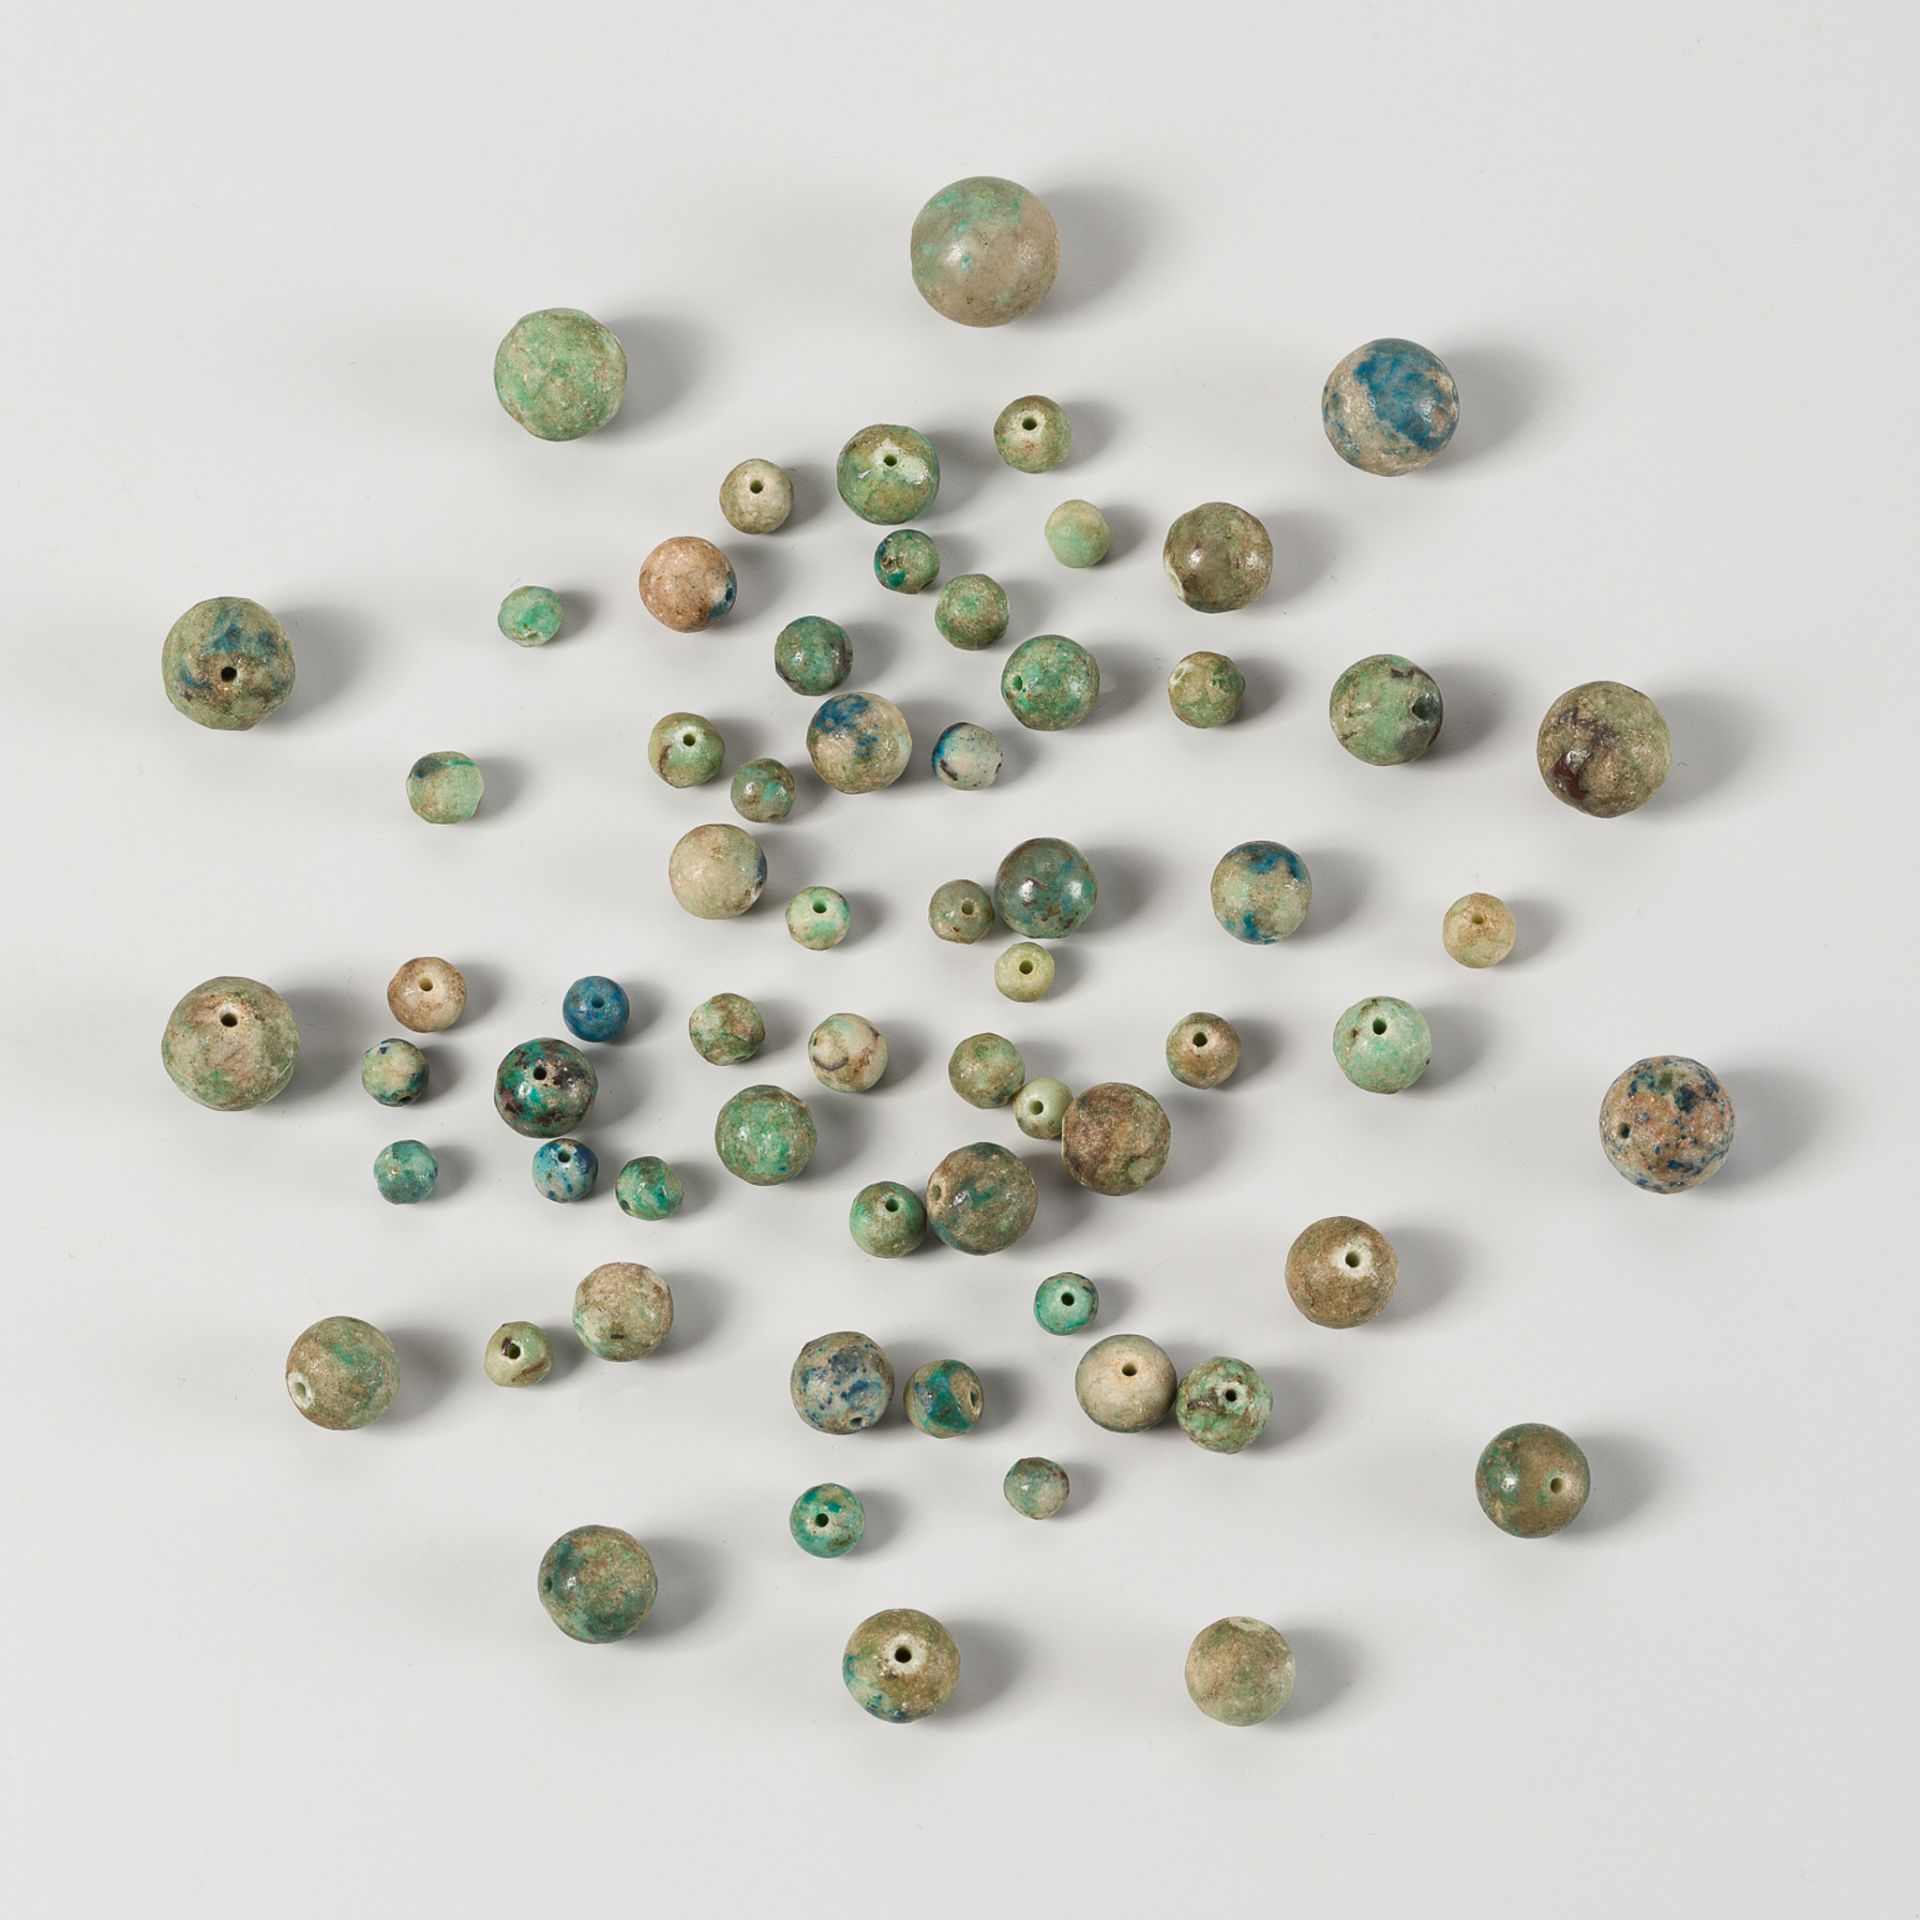 A LOT WITH 64 SMALL TURQUOISE AND LAPIS LAZULI BEADS, 19TH CENTURY OR EARLIER